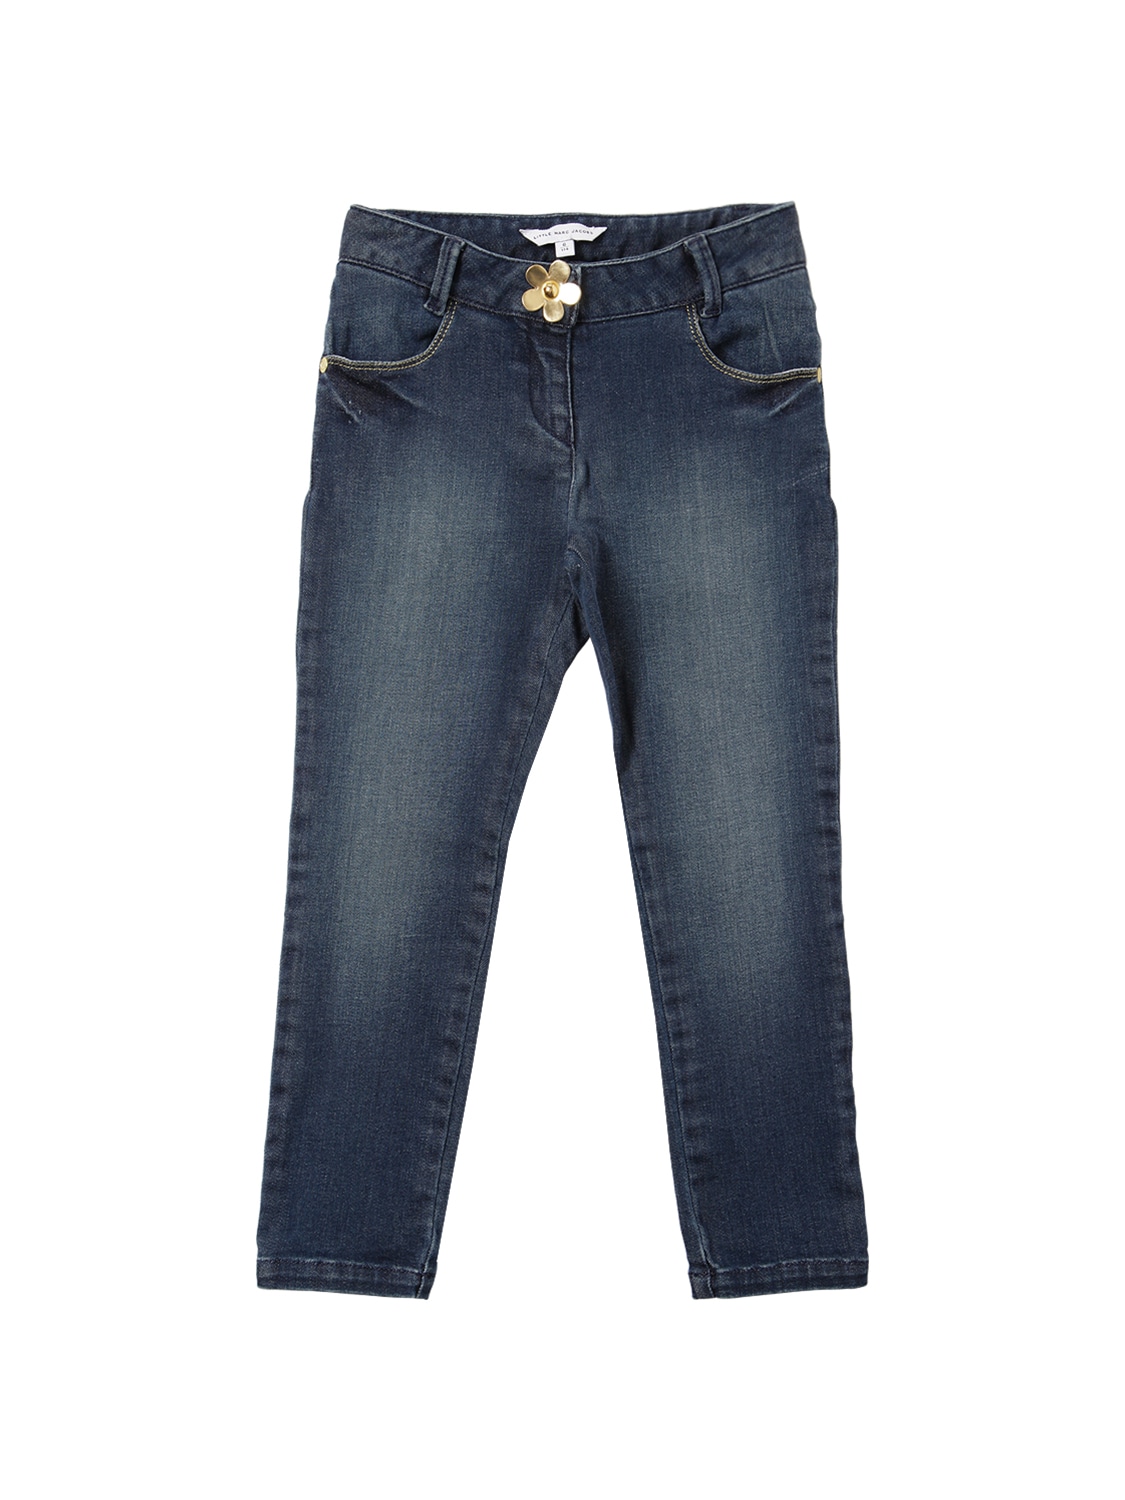 LITTLE MARC JACOBS STRETCH COTTON BLEND DENIM JEANS,70IFGD062-WJEW0